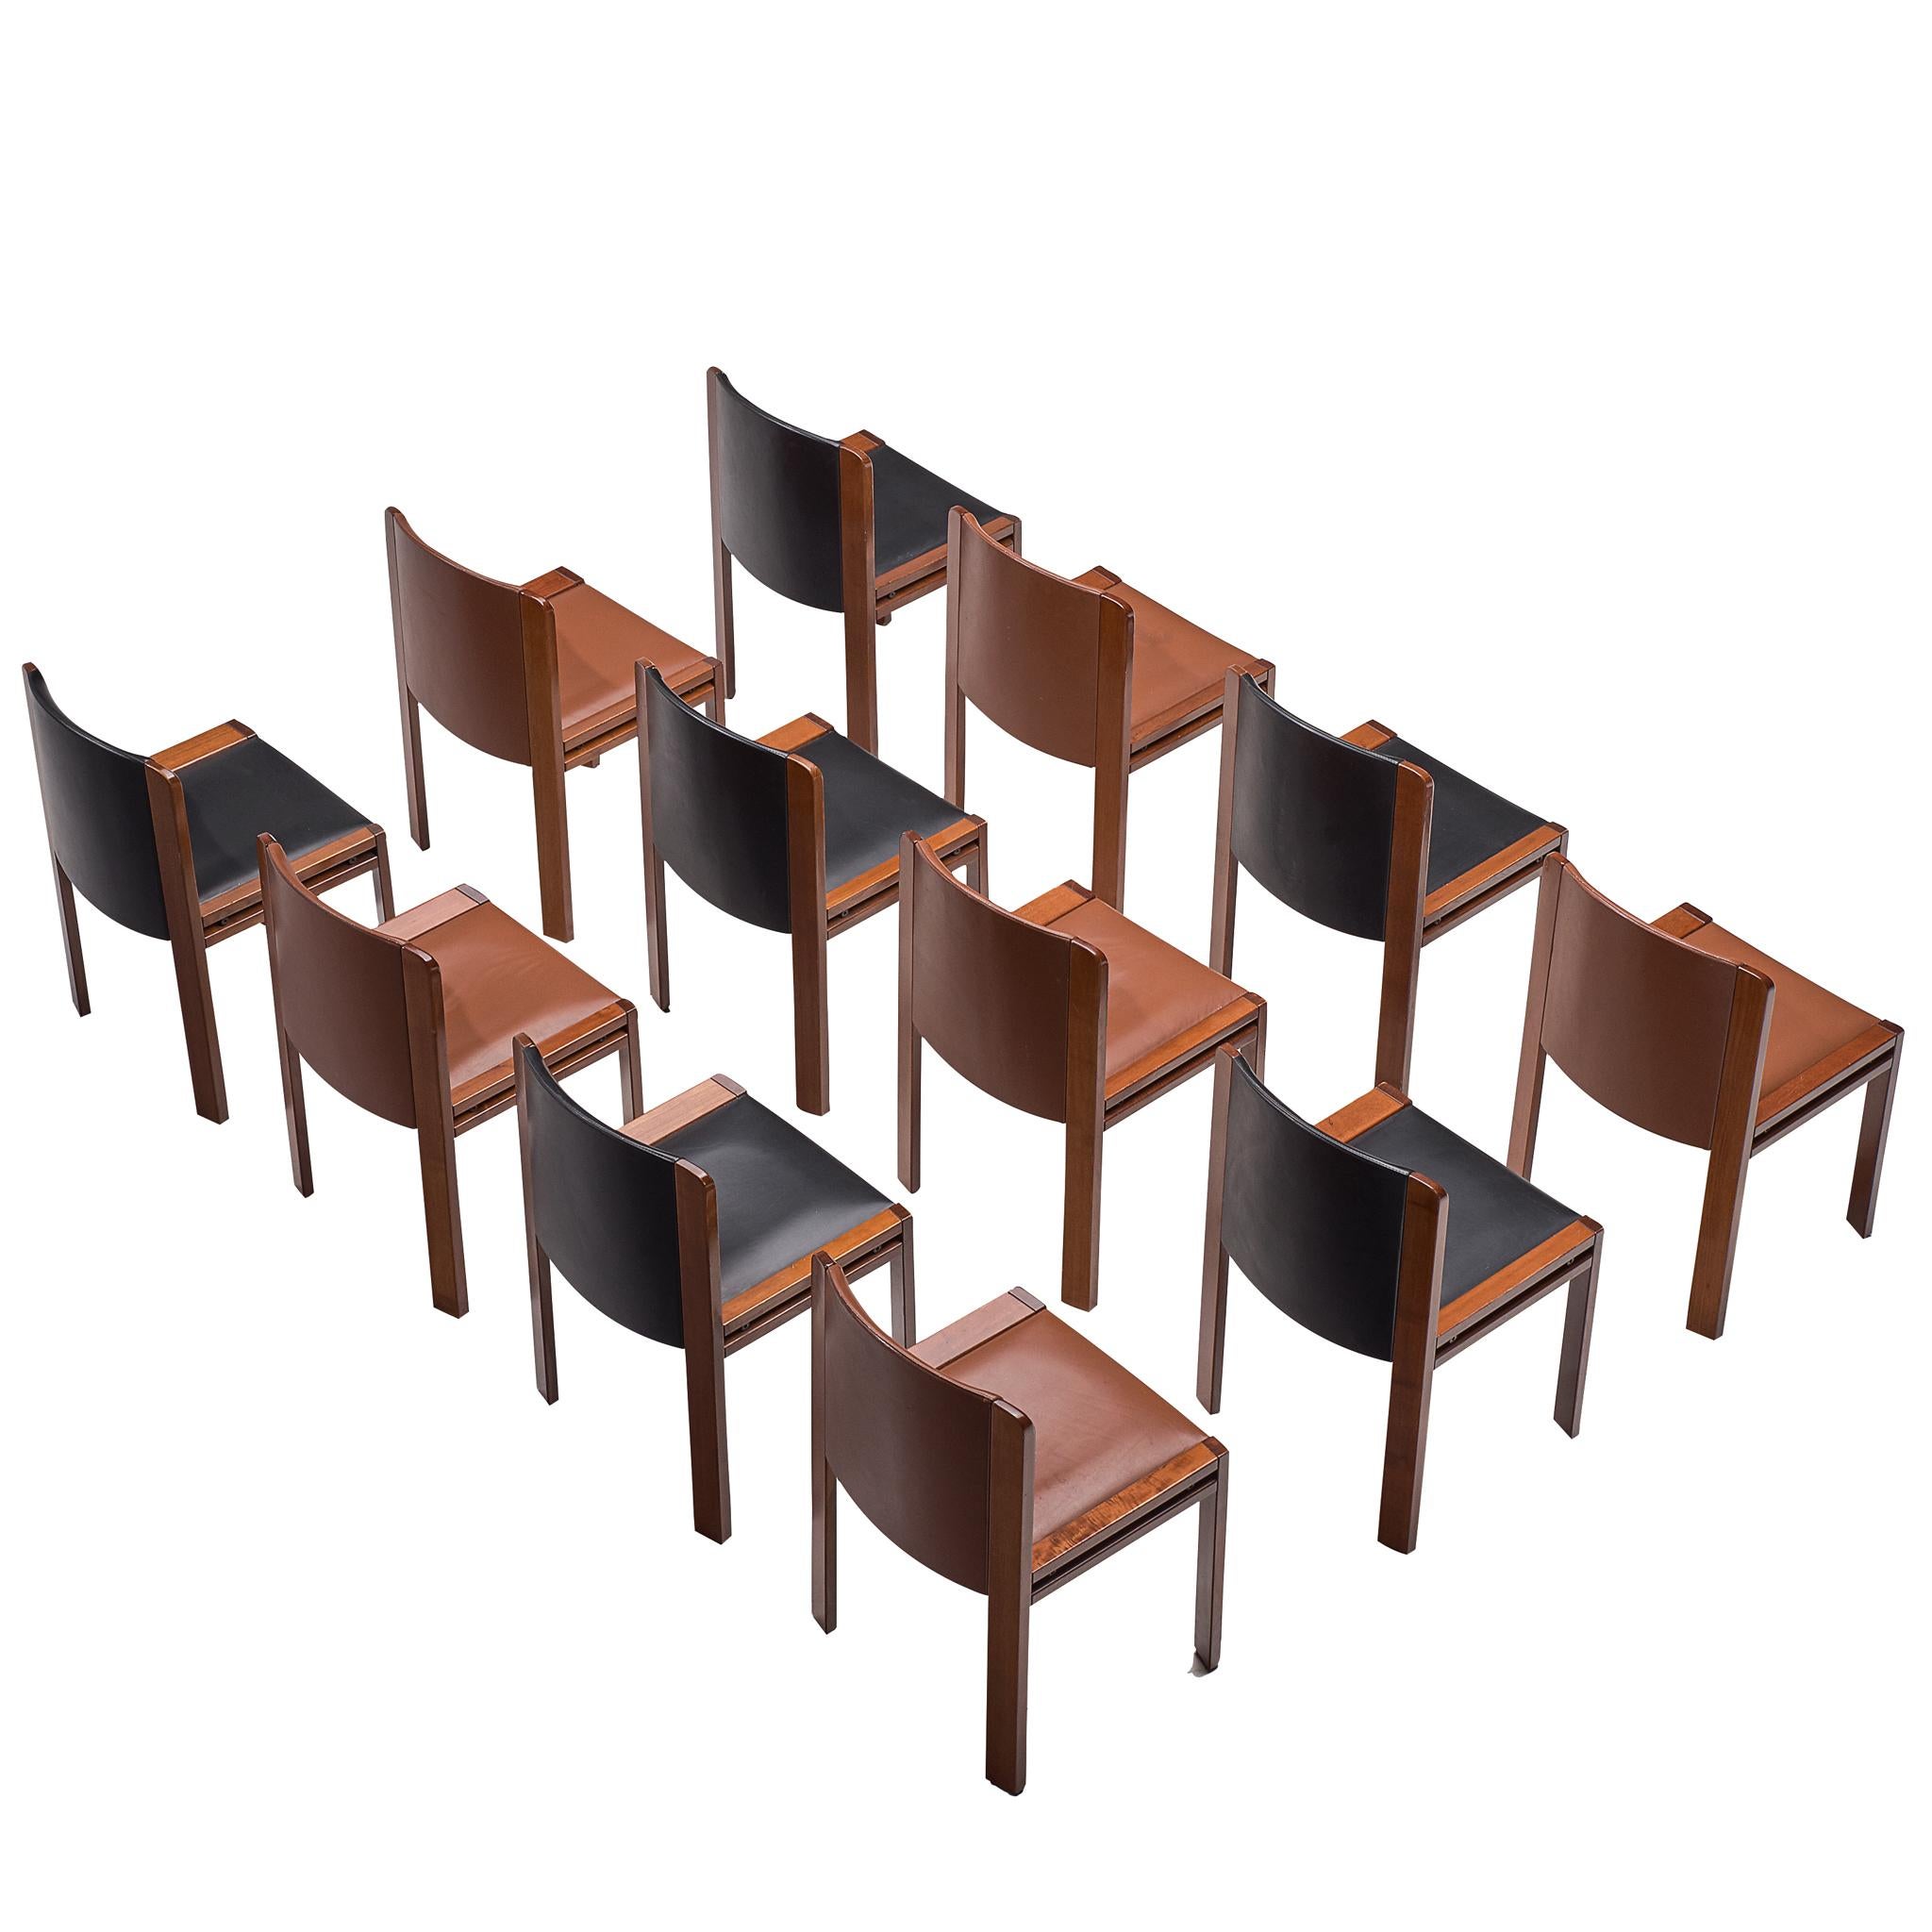  Twelve '300' Dining Chairs in Black and Brown Leather by Joe Colombo